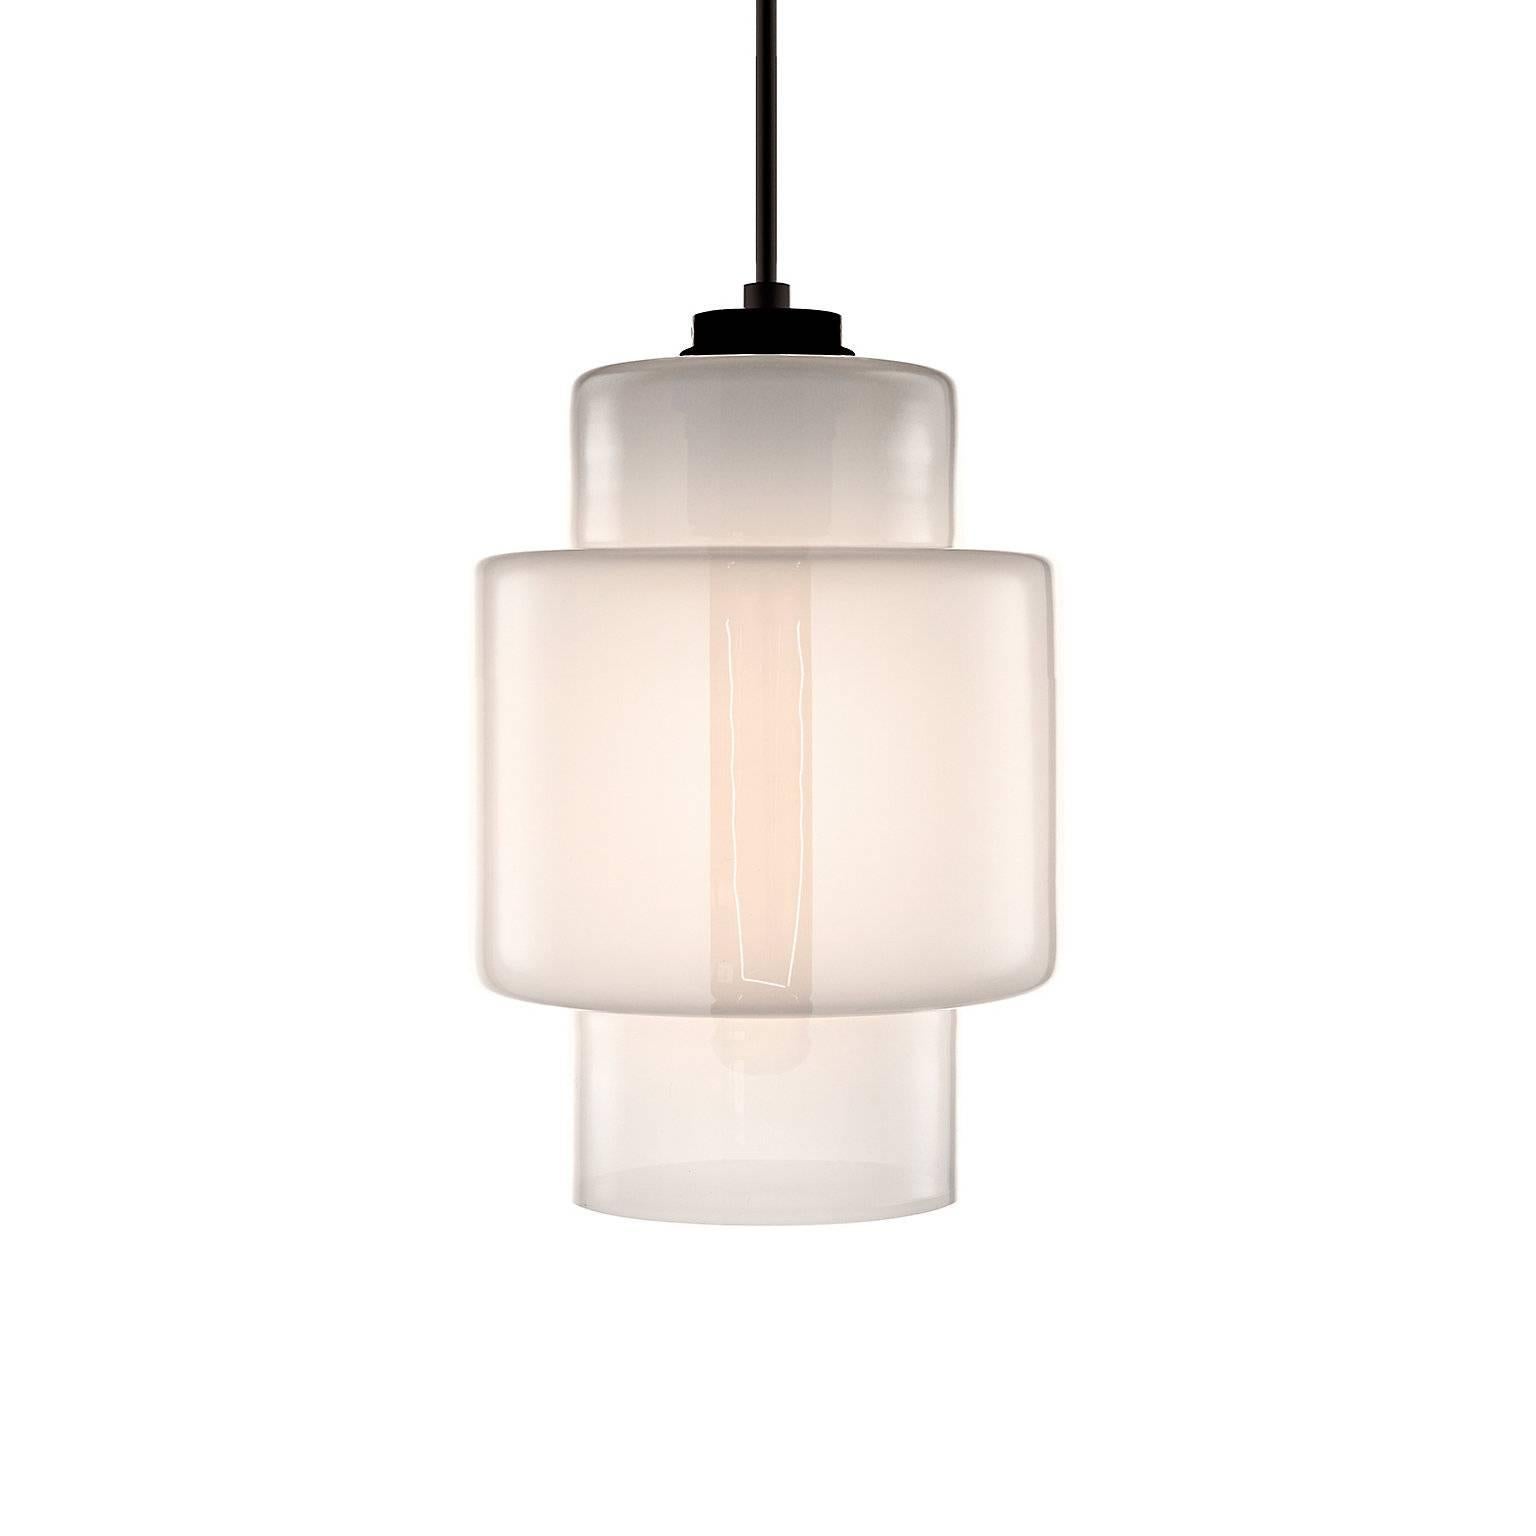 Axia Crystal Handblown Modern Glass Pendant Light, Made in the USA In New Condition For Sale In Beacon, NY